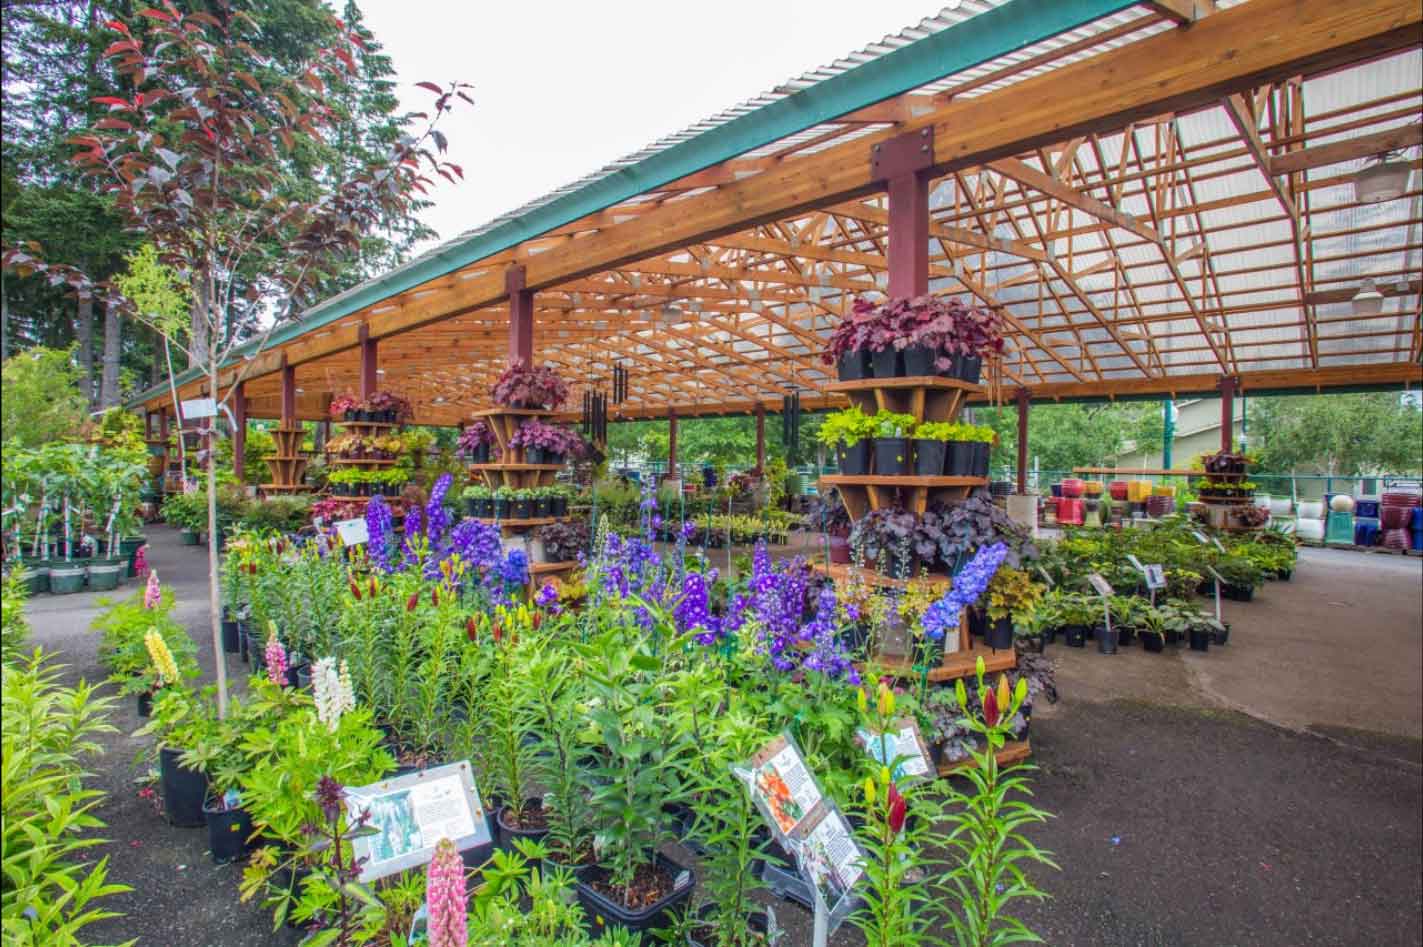 Rows of pots of plants for sale at Bark and Garden Center.